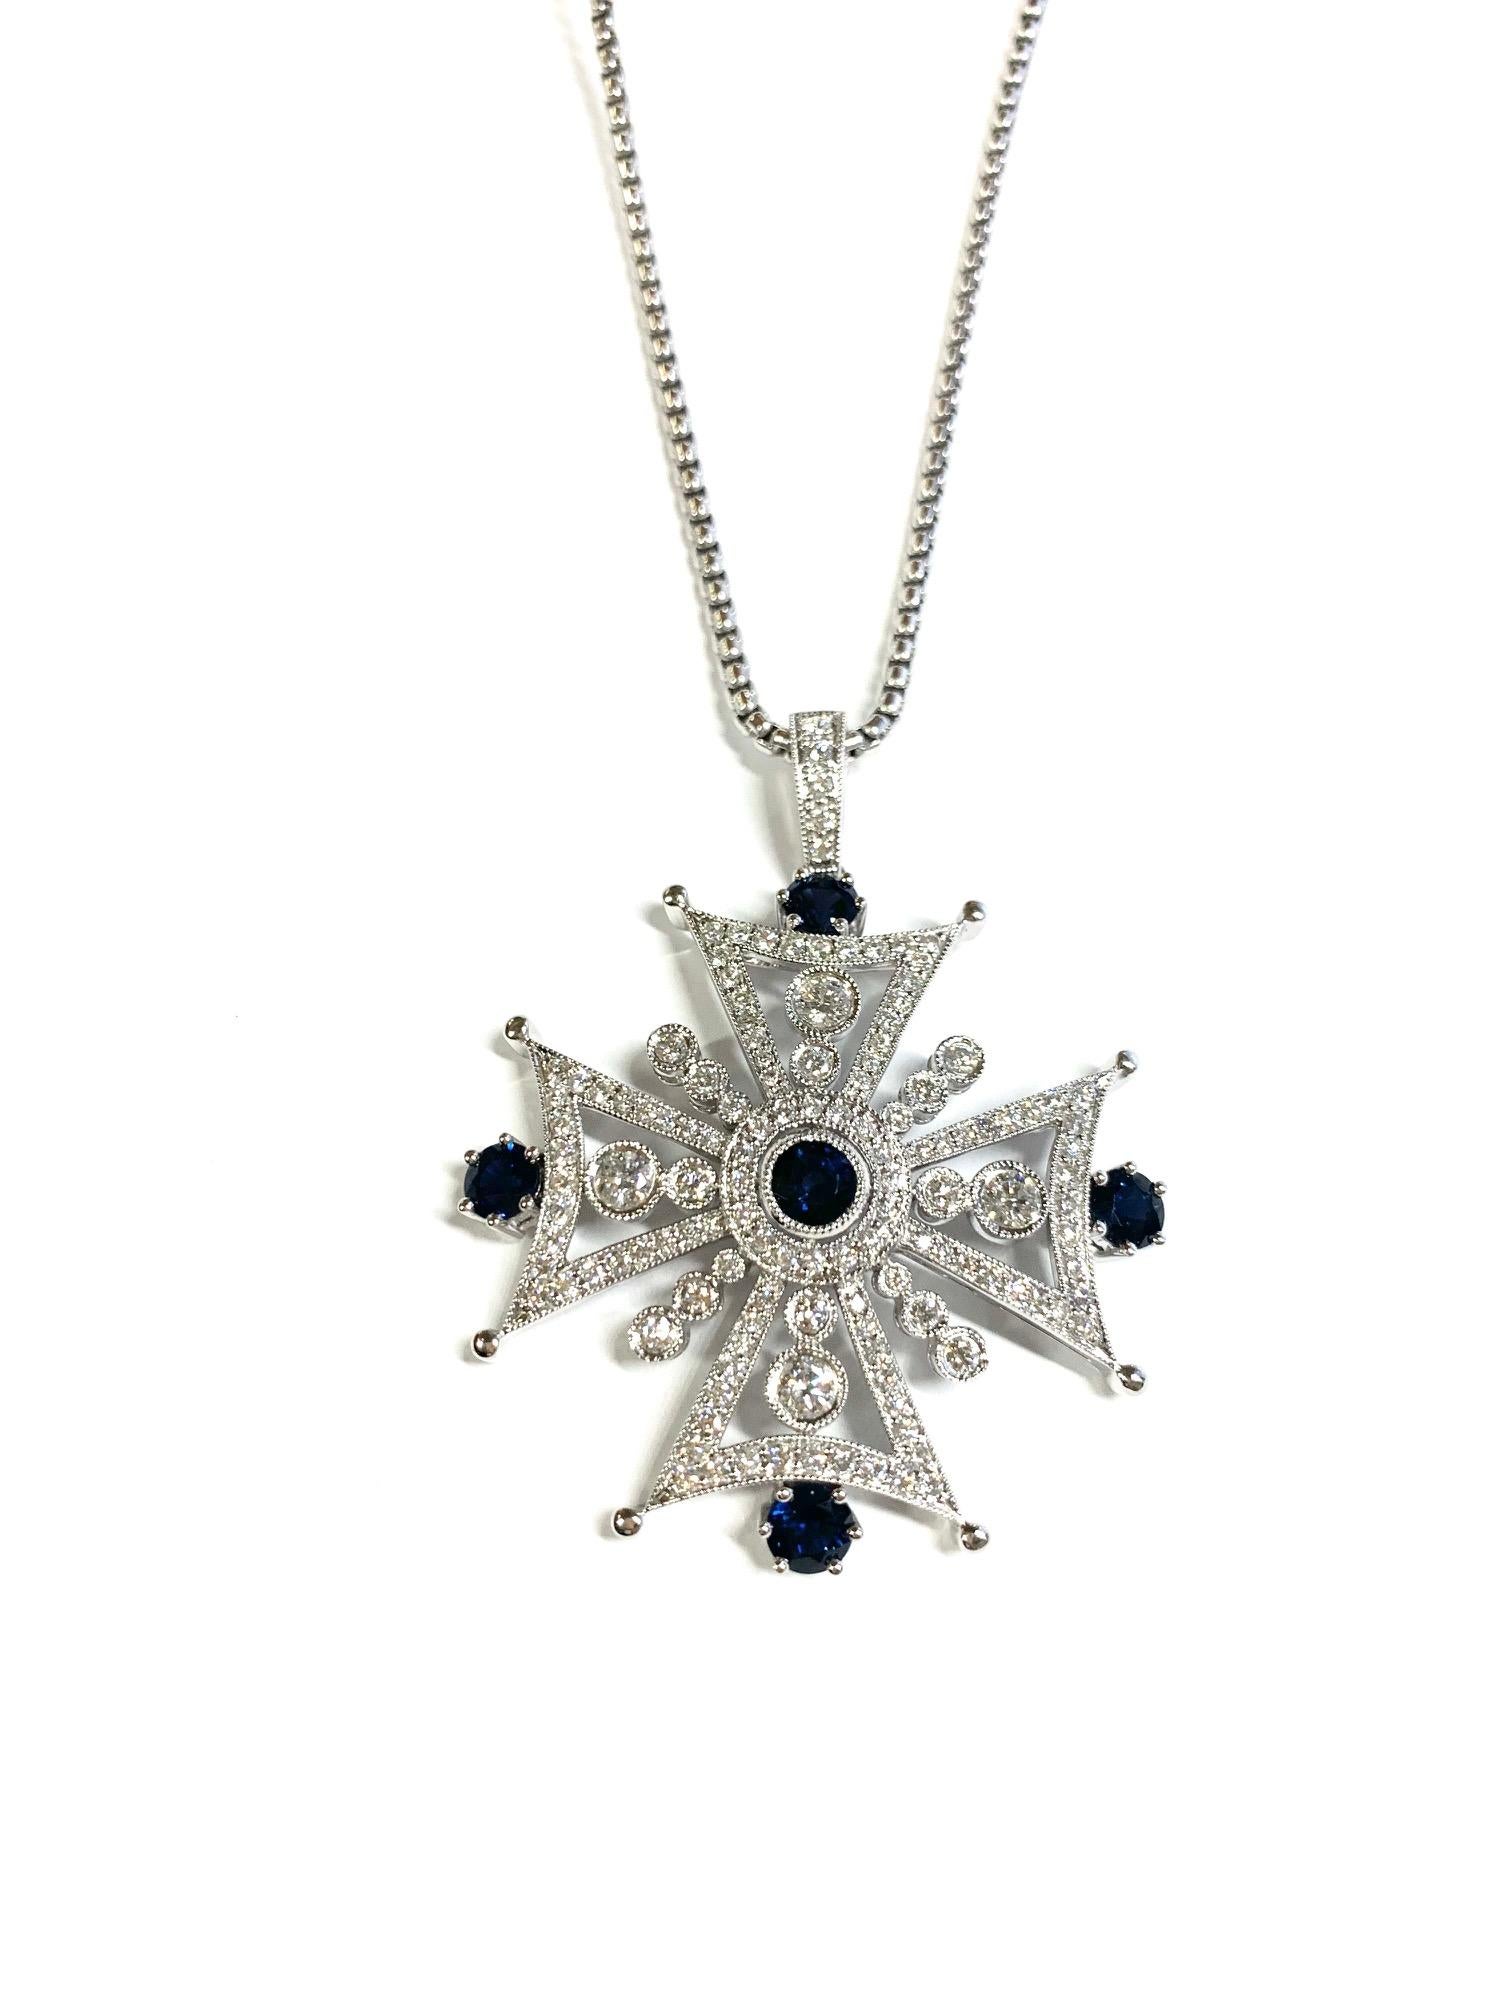 Exquisite Cross Diamond and Sapphire Pendant Necklace 

Stone: Diamonds
Stone Carat Weight: 3.00 Carat
Stone: Blue Sapphire
Stone Carat Weight: 4.07 Carat
Pendant: 2.25 x 1.75 Inches
Chain Style: Rounded Box Chain 
Chain Width: 2.2MM
Chain Length: